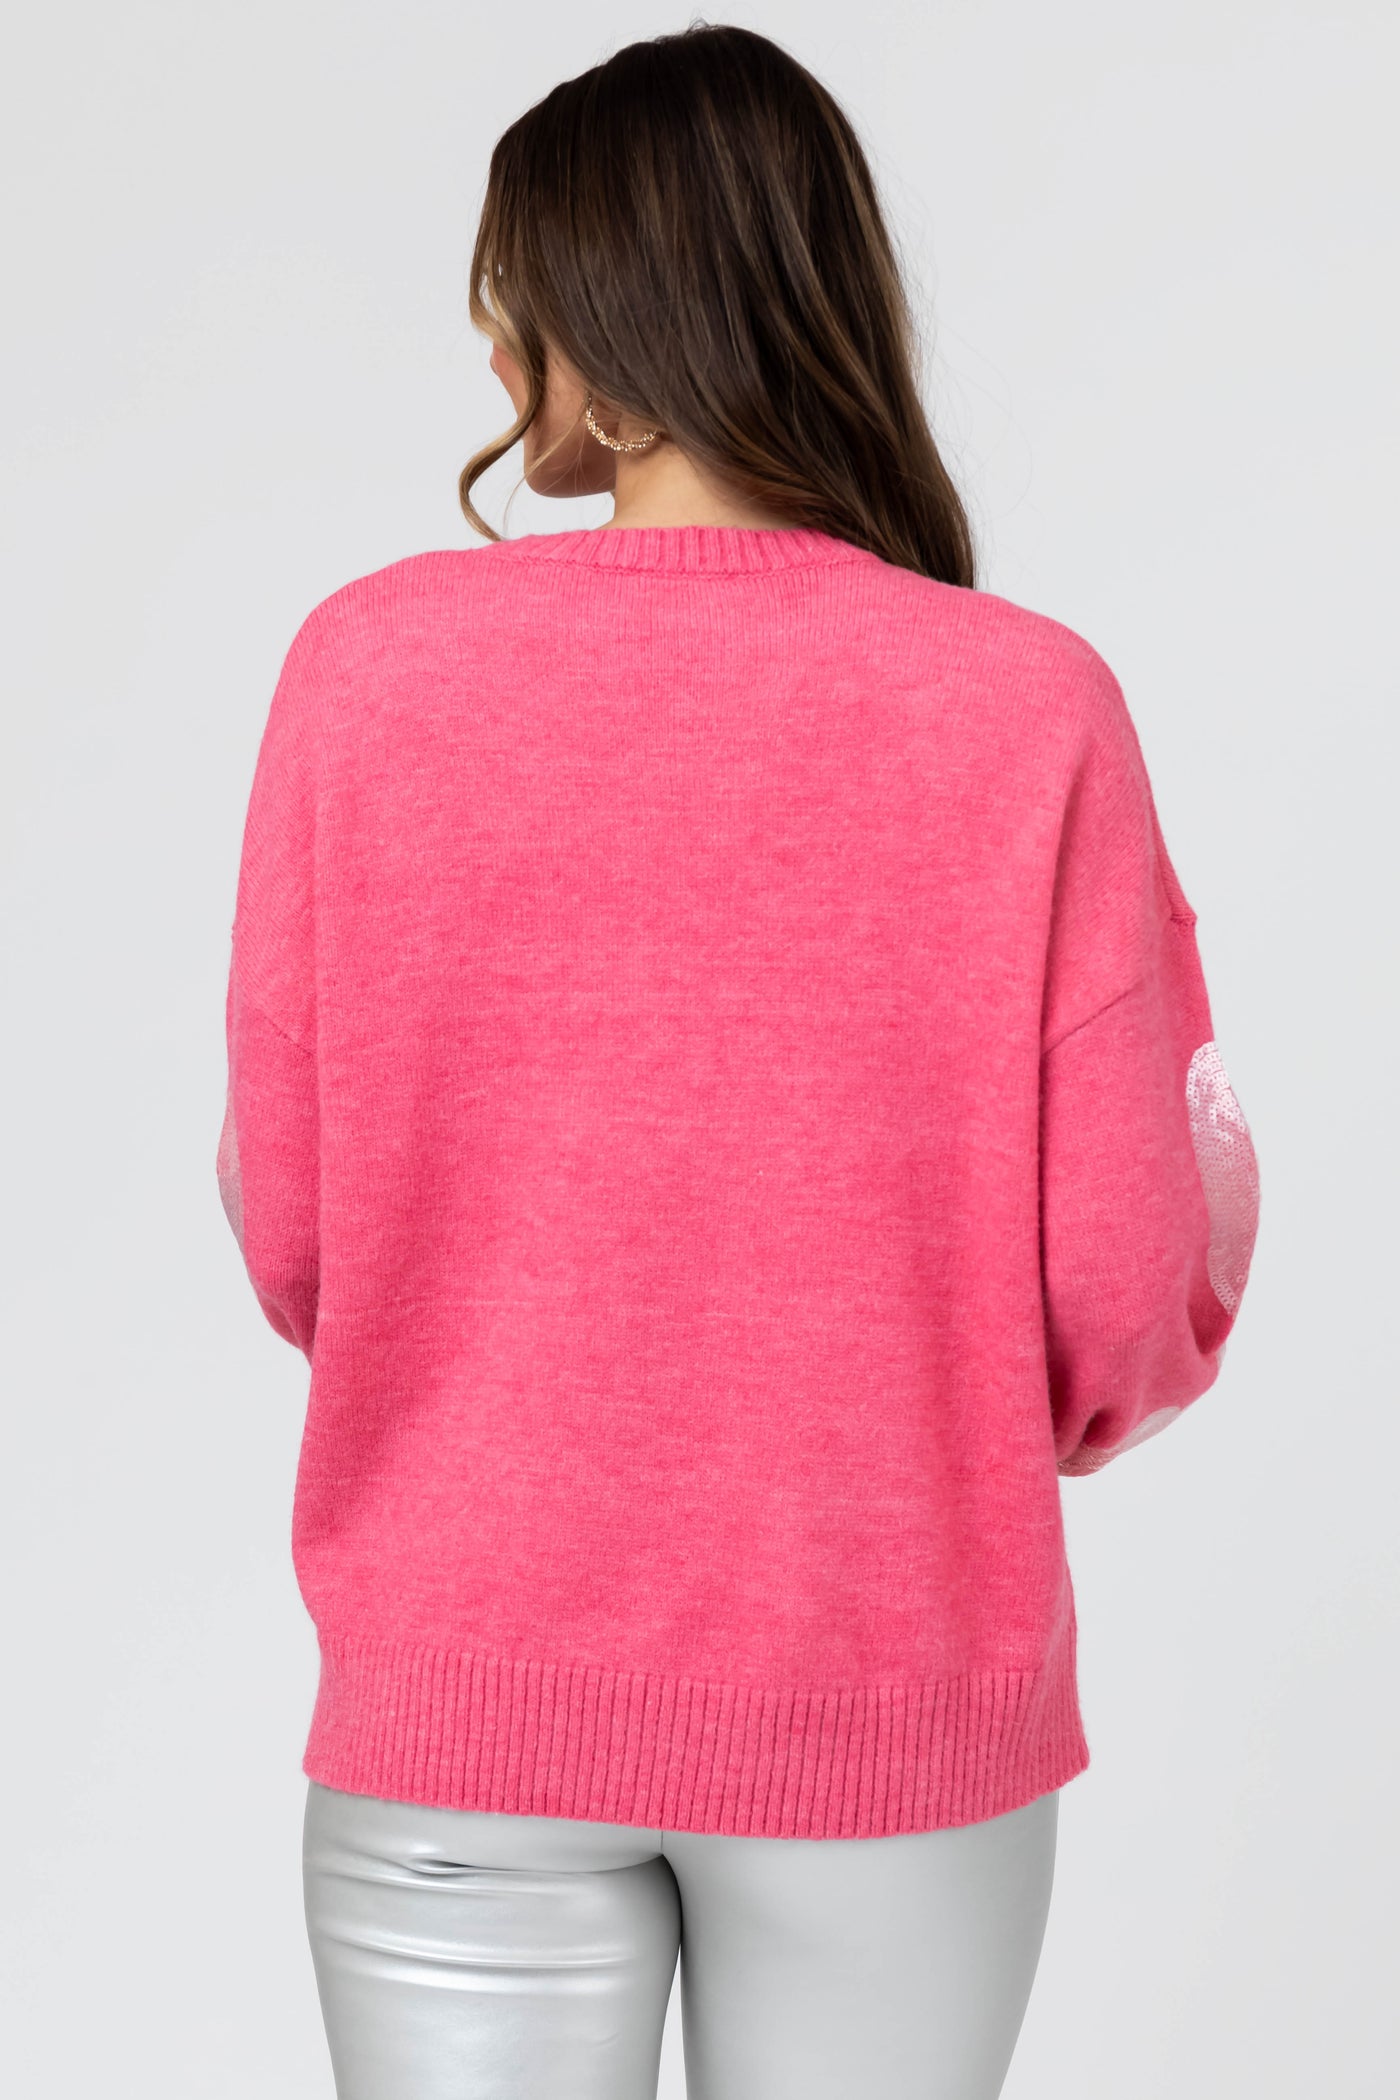 Punch Pearl and Sequin Heart Sweater